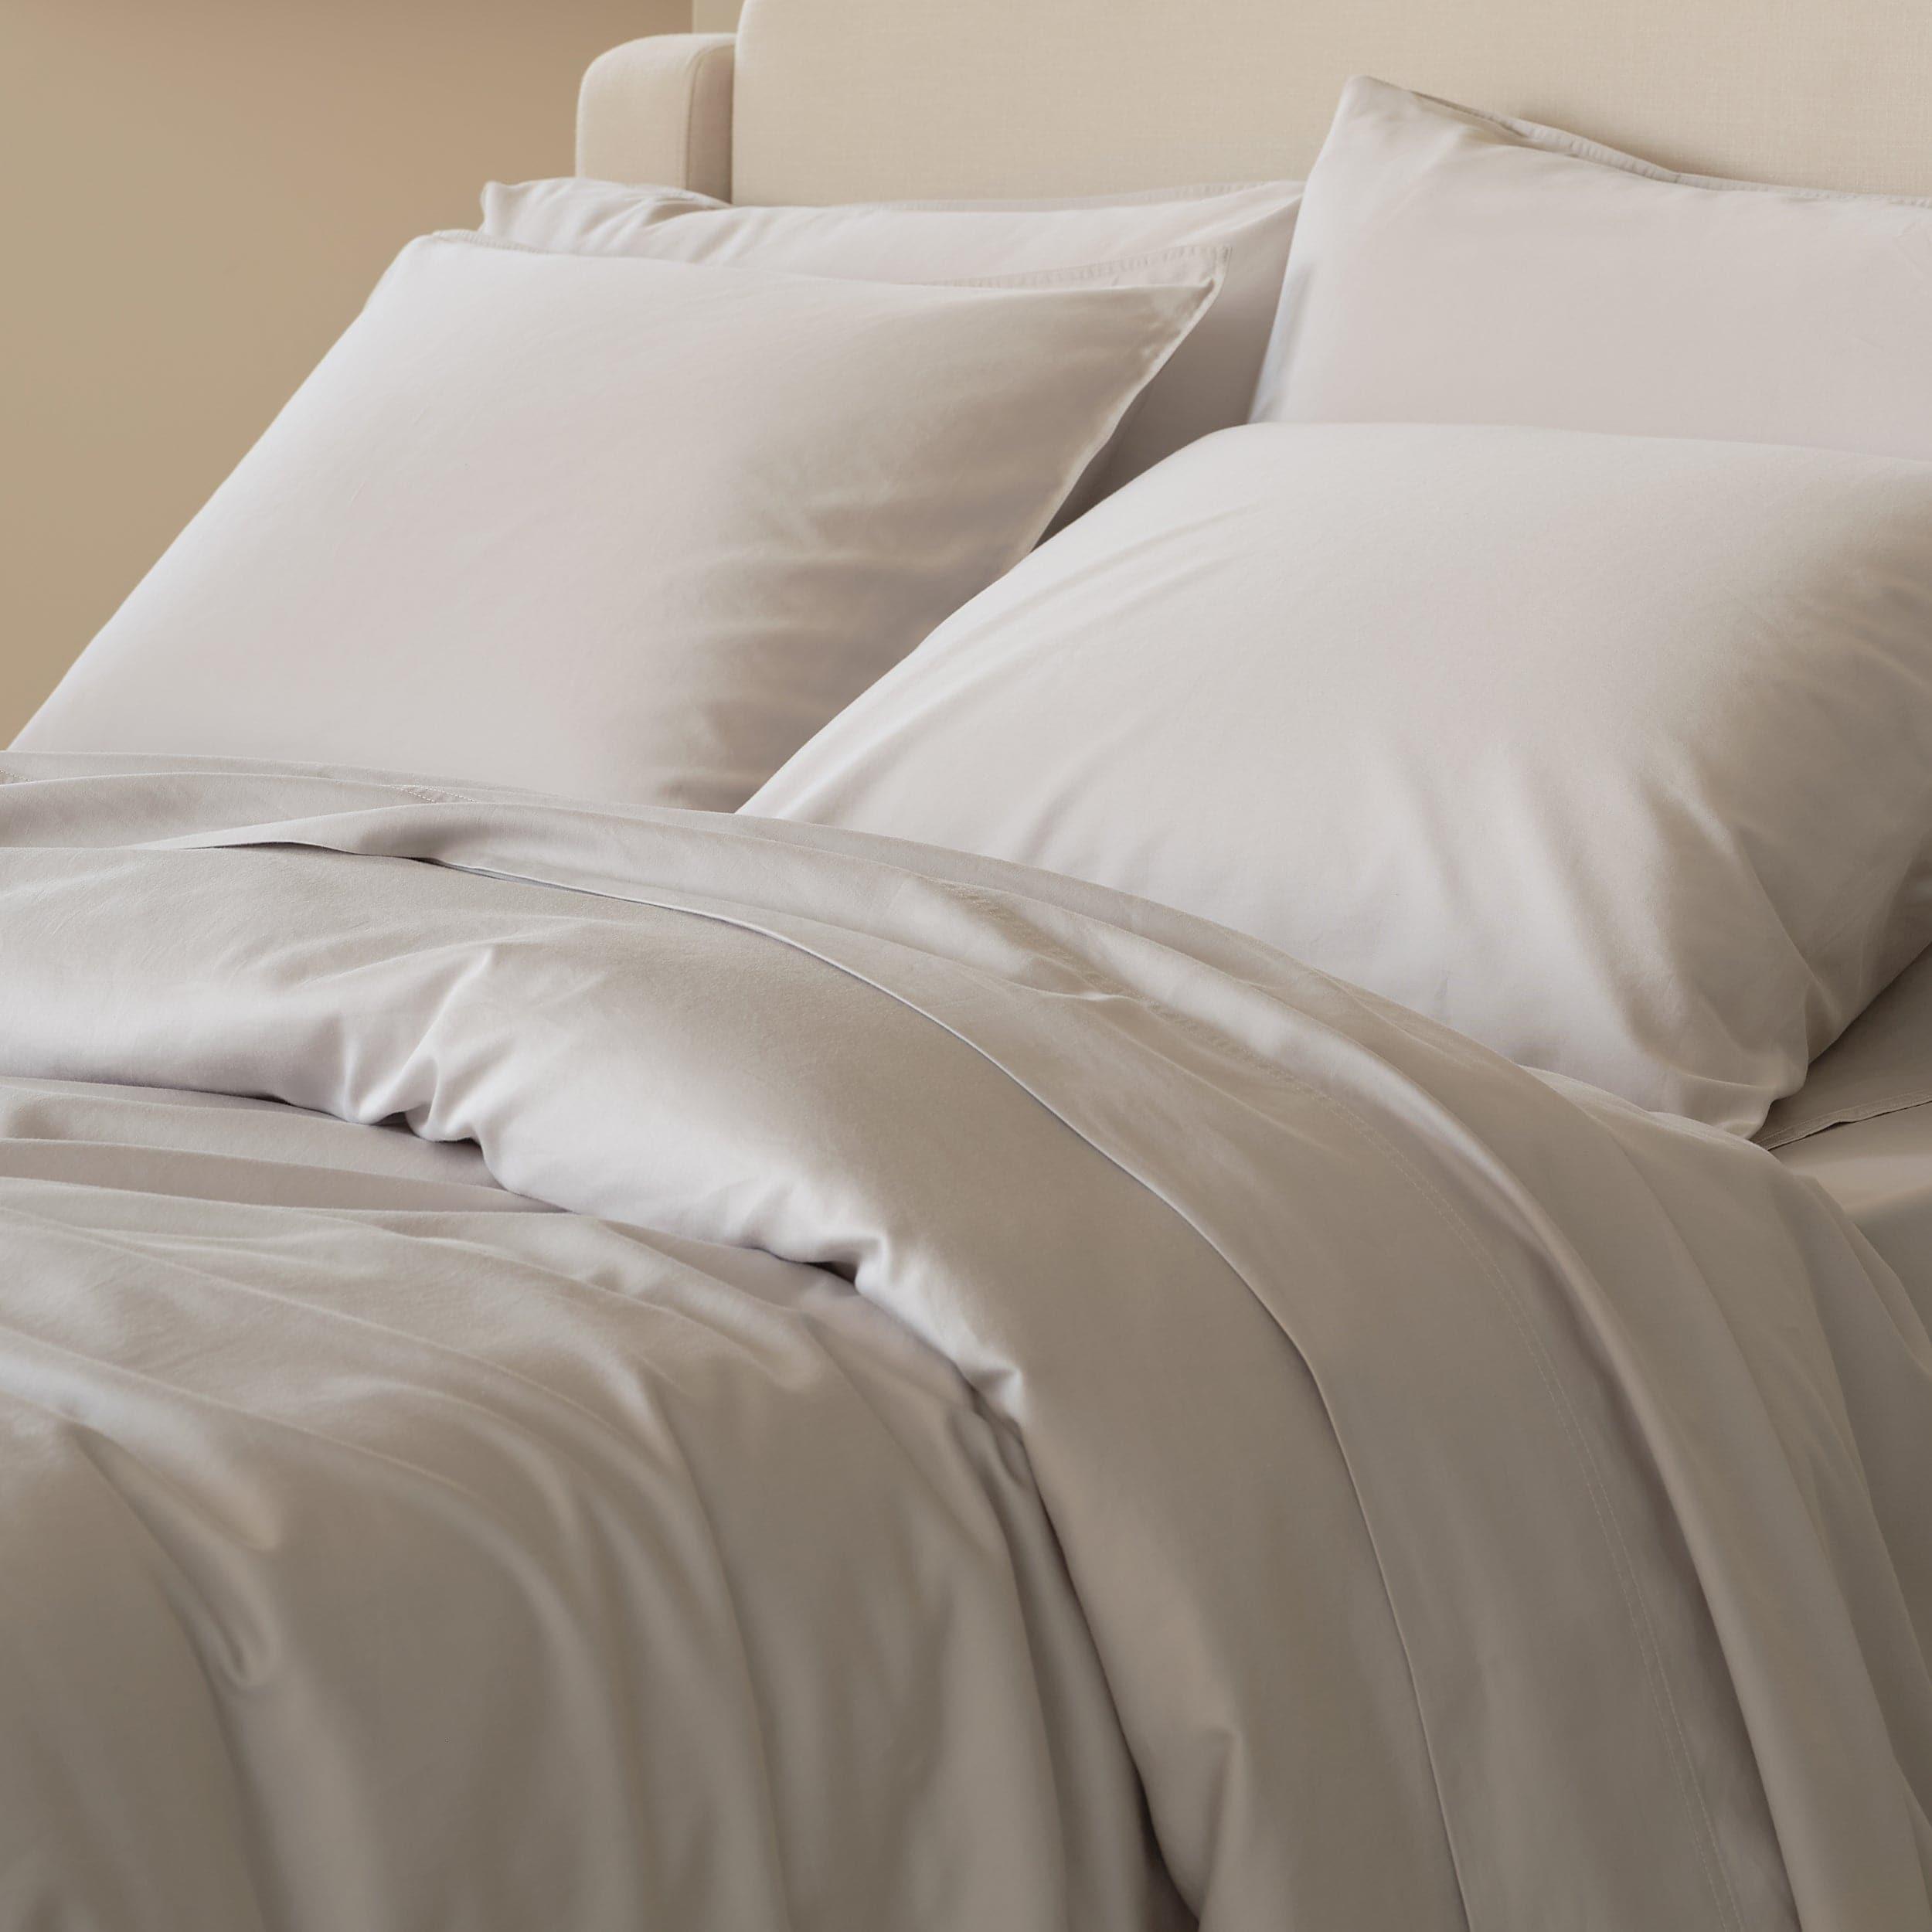 Transform your bedroom into a stylish retreat with our trendy queen duvet cover sets.